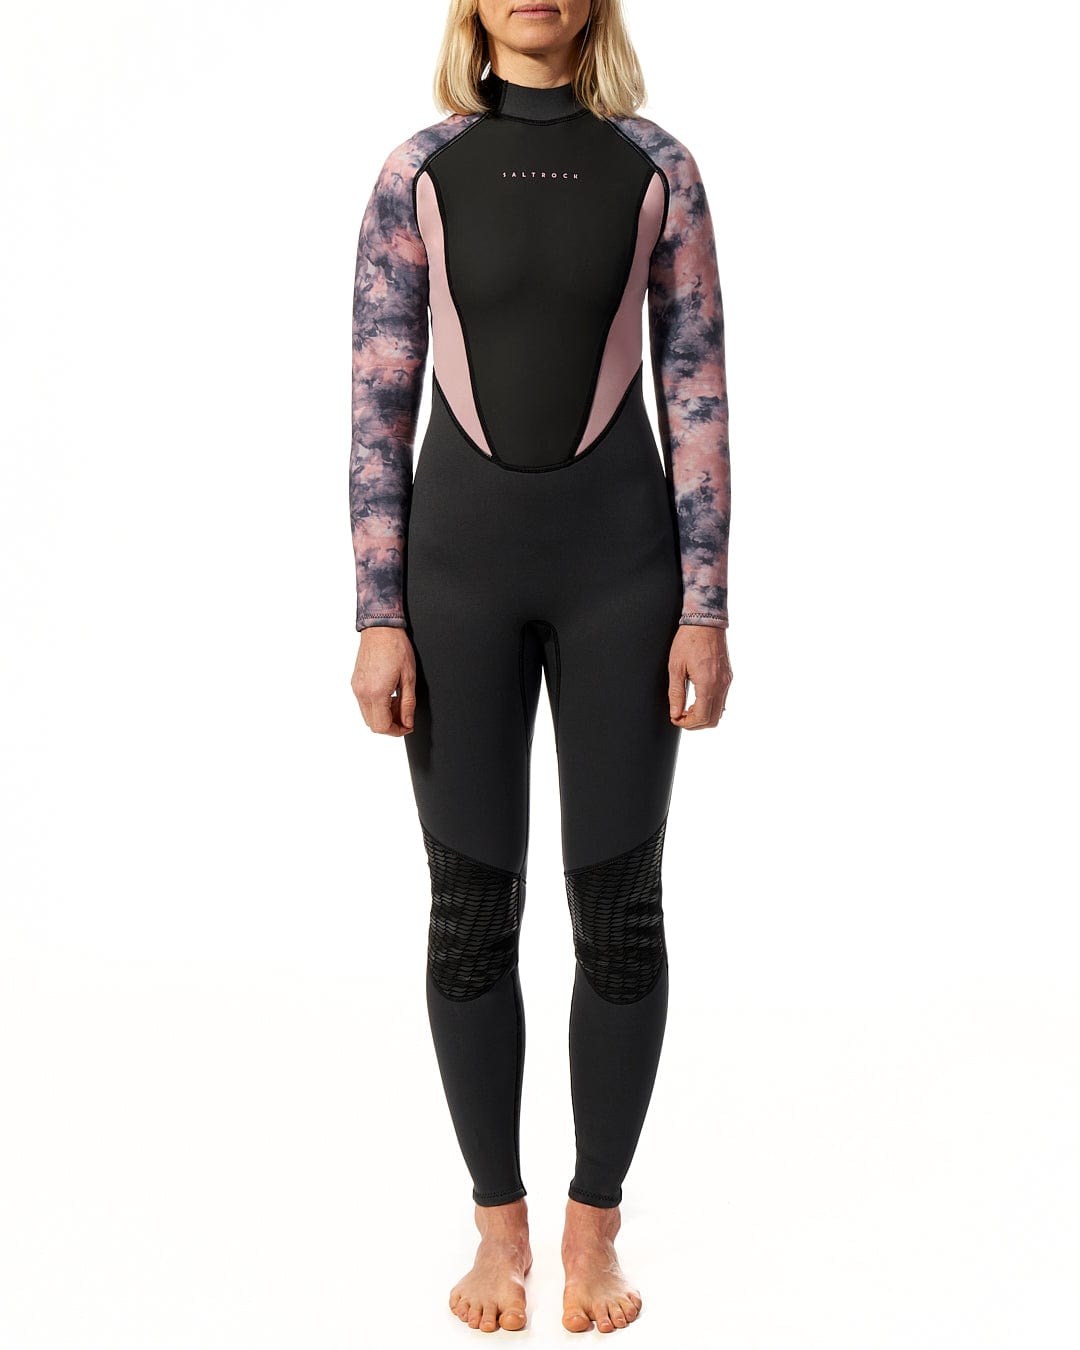 A woman wearing a Saltrock Vision - Womens 3/2 Back Zip Wetsuit - Black/Pink standing on a white background.